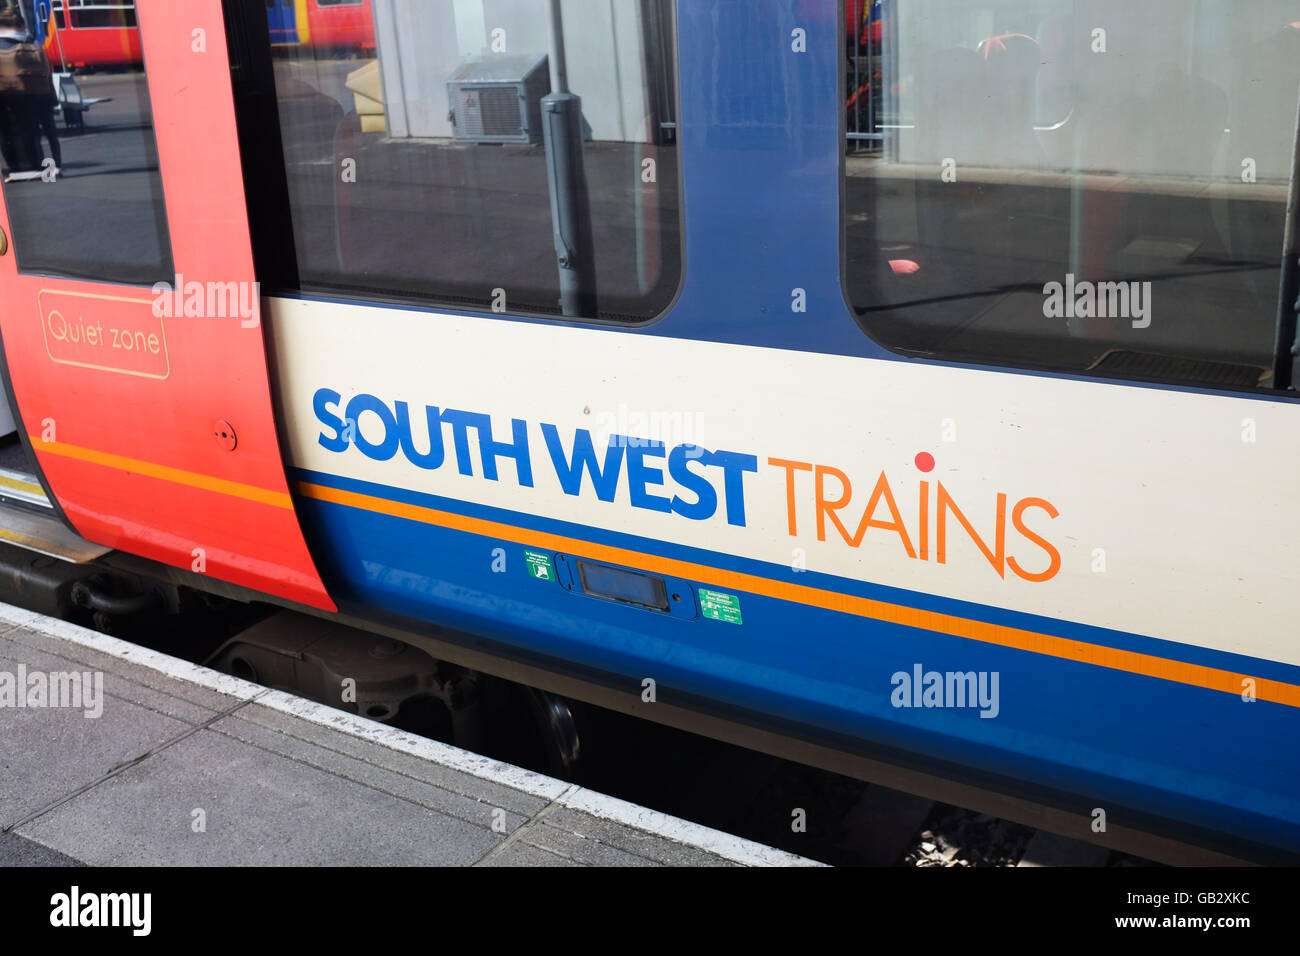 A South West train in England. Stock Photo